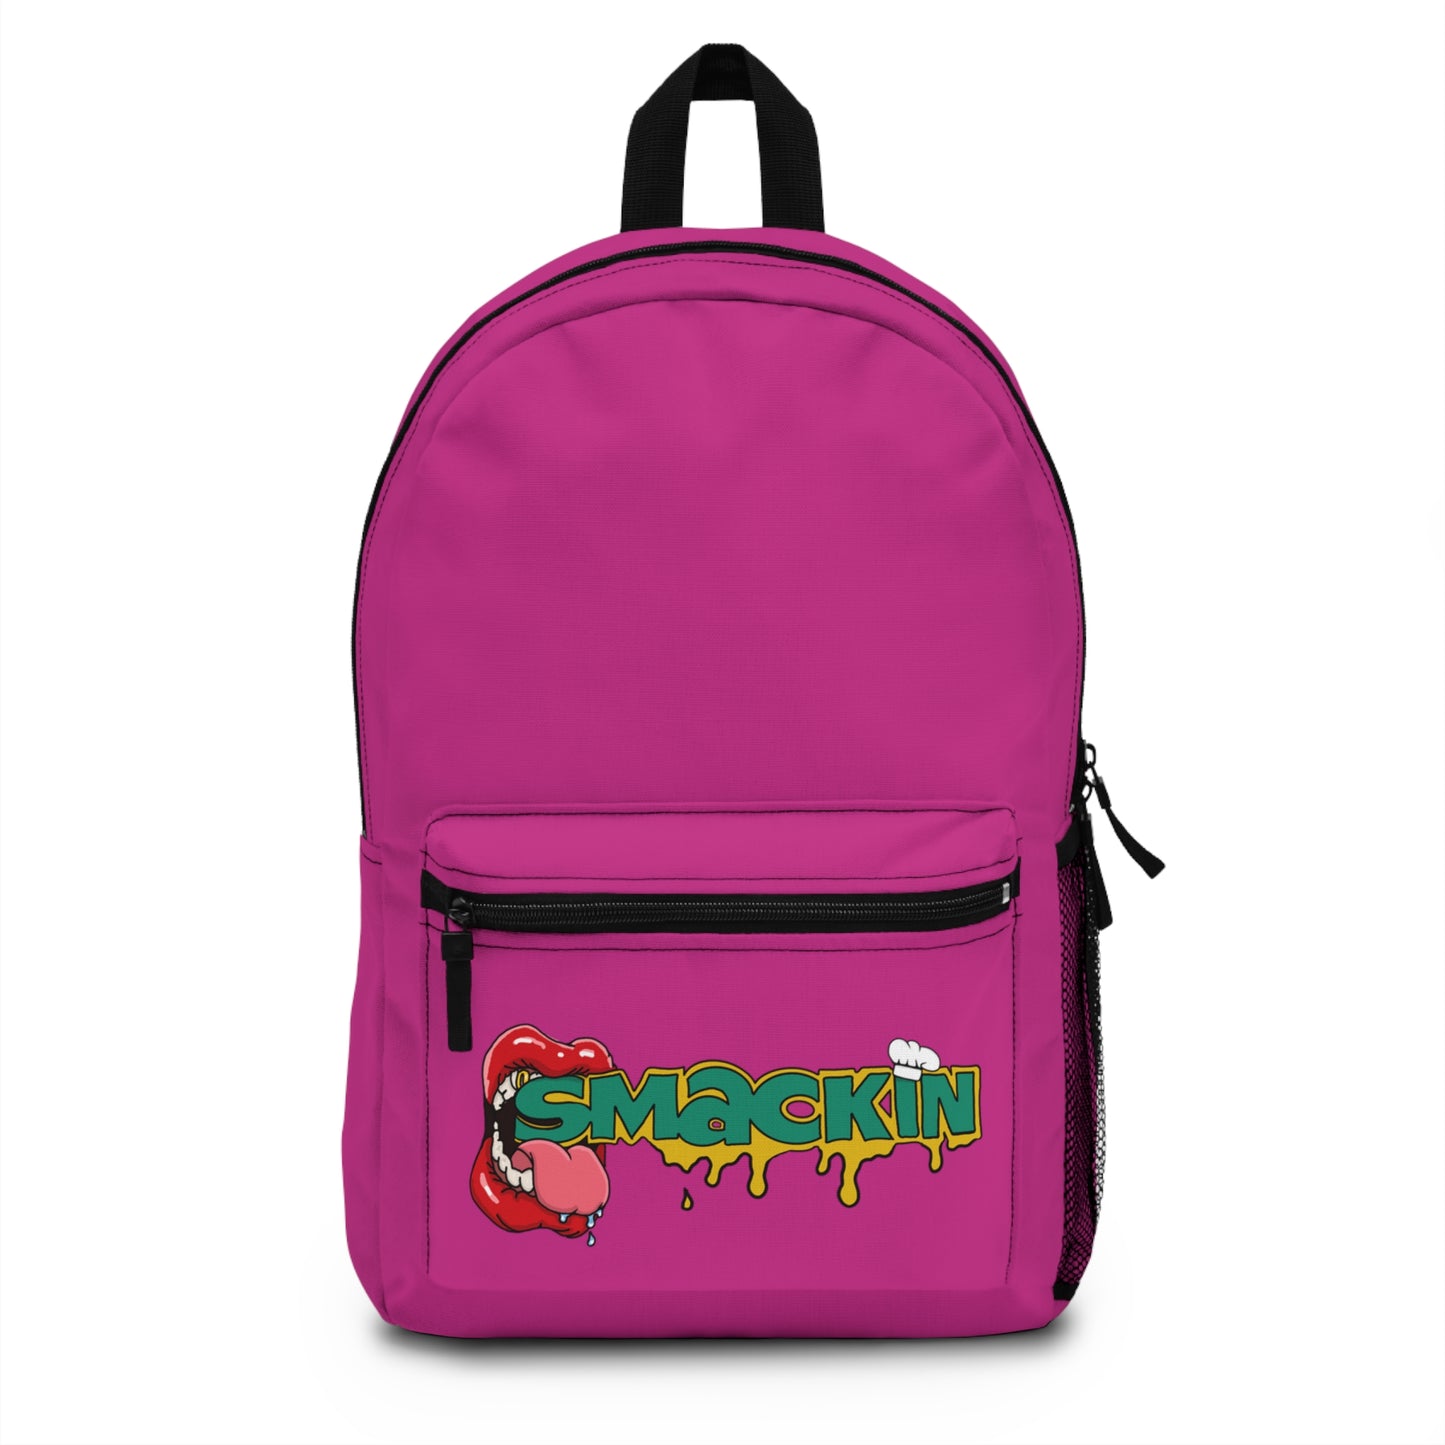 Copy of Backpack